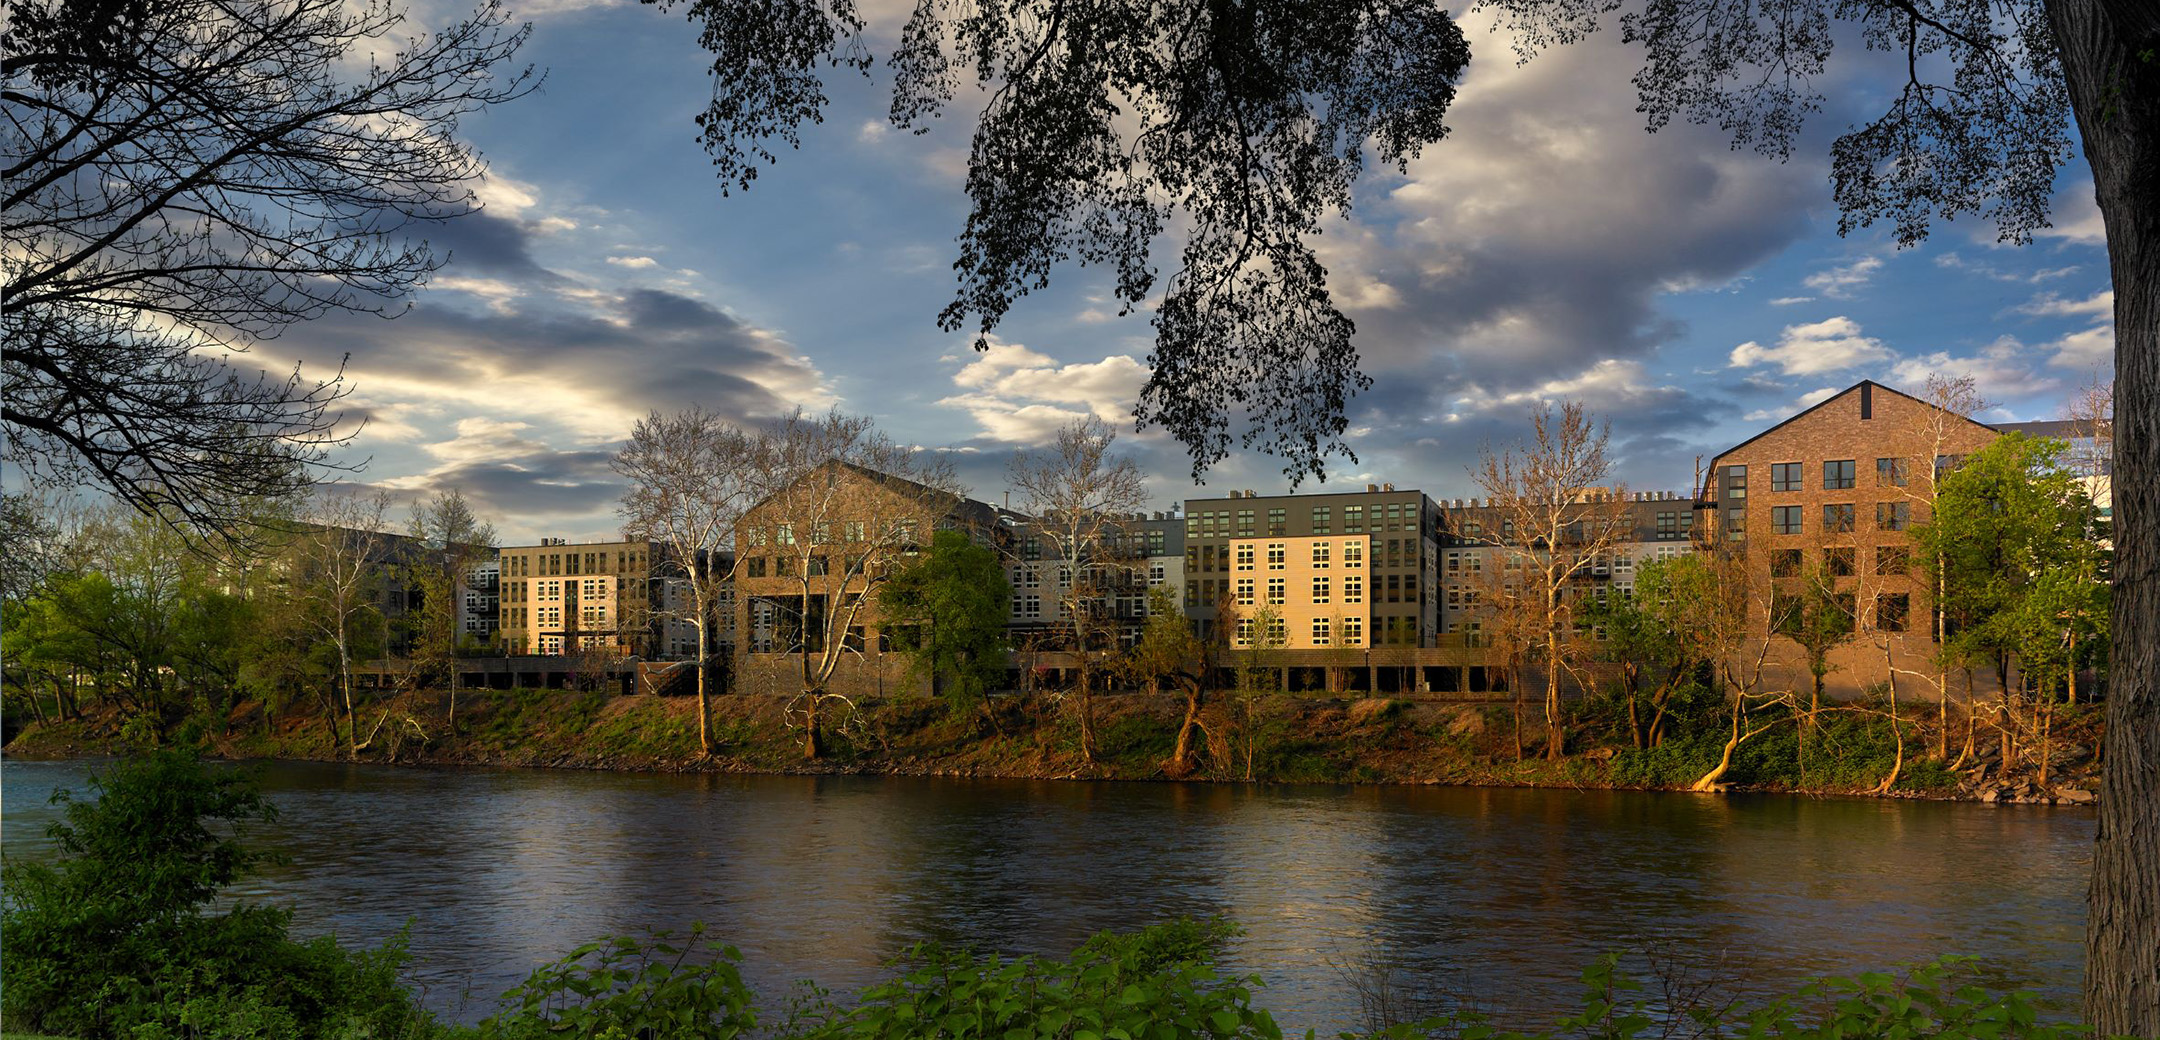 A view of the Matson Mill building across the Schuylkill River.